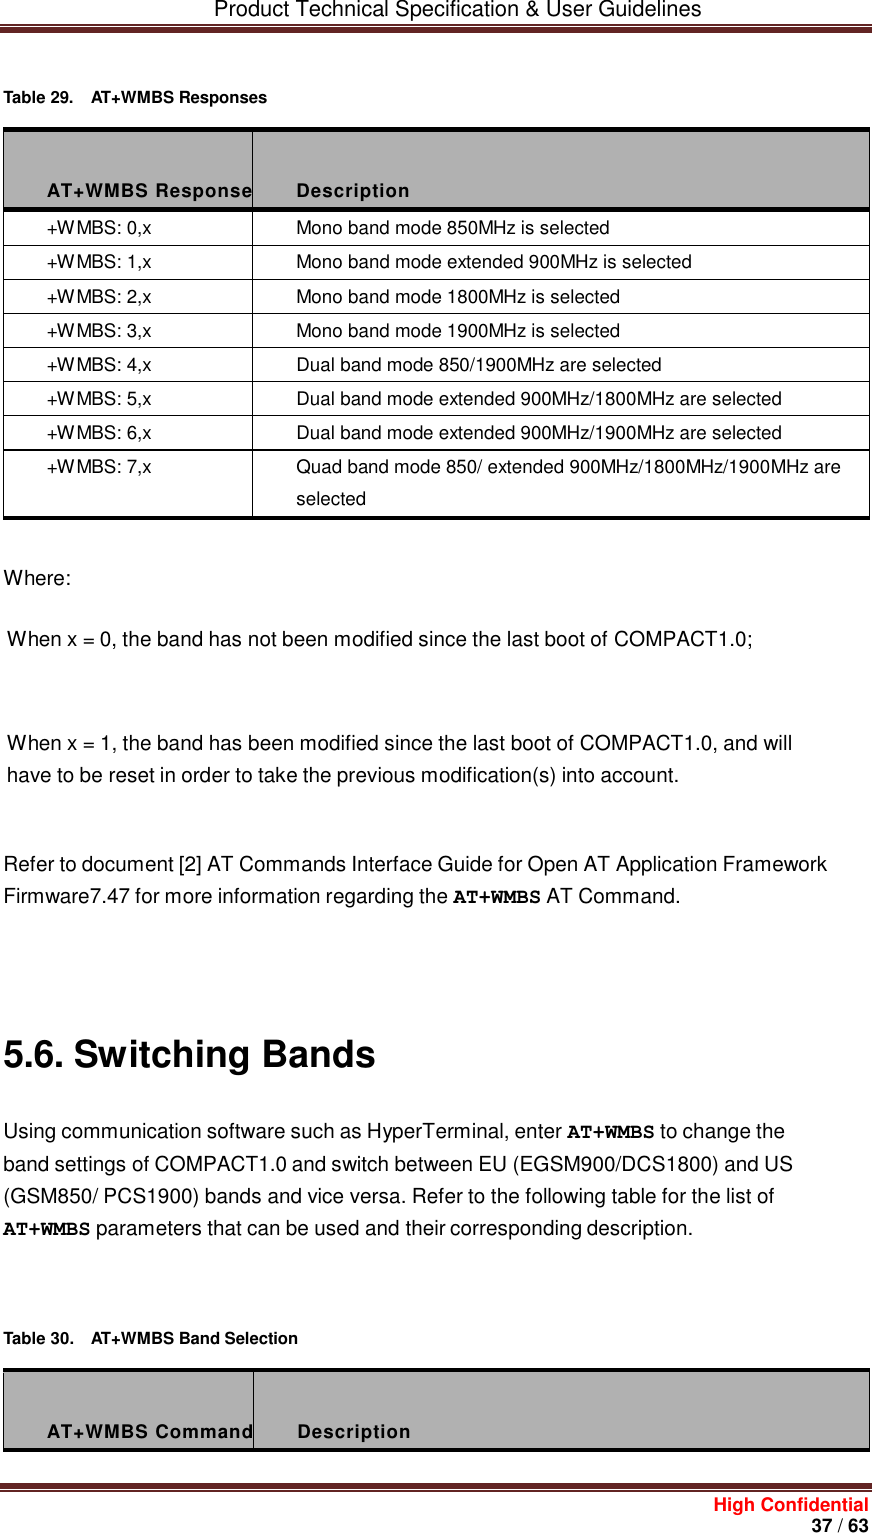         Product Technical Specification &amp; User Guidelines     High Confidential       37 / 63     Table 29.  AT+WMBS Responses    AT+WMBS Response  Description +WMBS: 0,x Mono band mode 850MHz is selected +WMBS: 1,x Mono band mode extended 900MHz is selected +WMBS: 2,x Mono band mode 1800MHz is selected +WMBS: 3,x Mono band mode 1900MHz is selected +WMBS: 4,x Dual band mode 850/1900MHz are selected +WMBS: 5,x Dual band mode extended 900MHz/1800MHz are selected +WMBS: 6,x Dual band mode extended 900MHz/1900MHz are selected +WMBS: 7,x Quad band mode 850/ extended 900MHz/1800MHz/1900MHz are selected   Where: When x = 0, the band has not been modified since the last boot of COMPACT1.0;    When x = 1, the band has been modified since the last boot of COMPACT1.0, and will have to be reset in order to take the previous modification(s) into account.    Refer to document [2] AT Commands Interface Guide for Open AT Application Framework Firmware7.47 for more information regarding the AT+WMBS AT Command.       5.6. Switching Bands Using communication software such as HyperTerminal, enter AT+WMBS to change the band settings of COMPACT1.0 and switch between EU (EGSM900/DCS1800) and US (GSM850/ PCS1900) bands and vice versa. Refer to the following table for the list of AT+WMBS parameters that can be used and their corresponding description.     Table 30.  AT+WMBS Band Selection    AT+WMBS Command  Description 